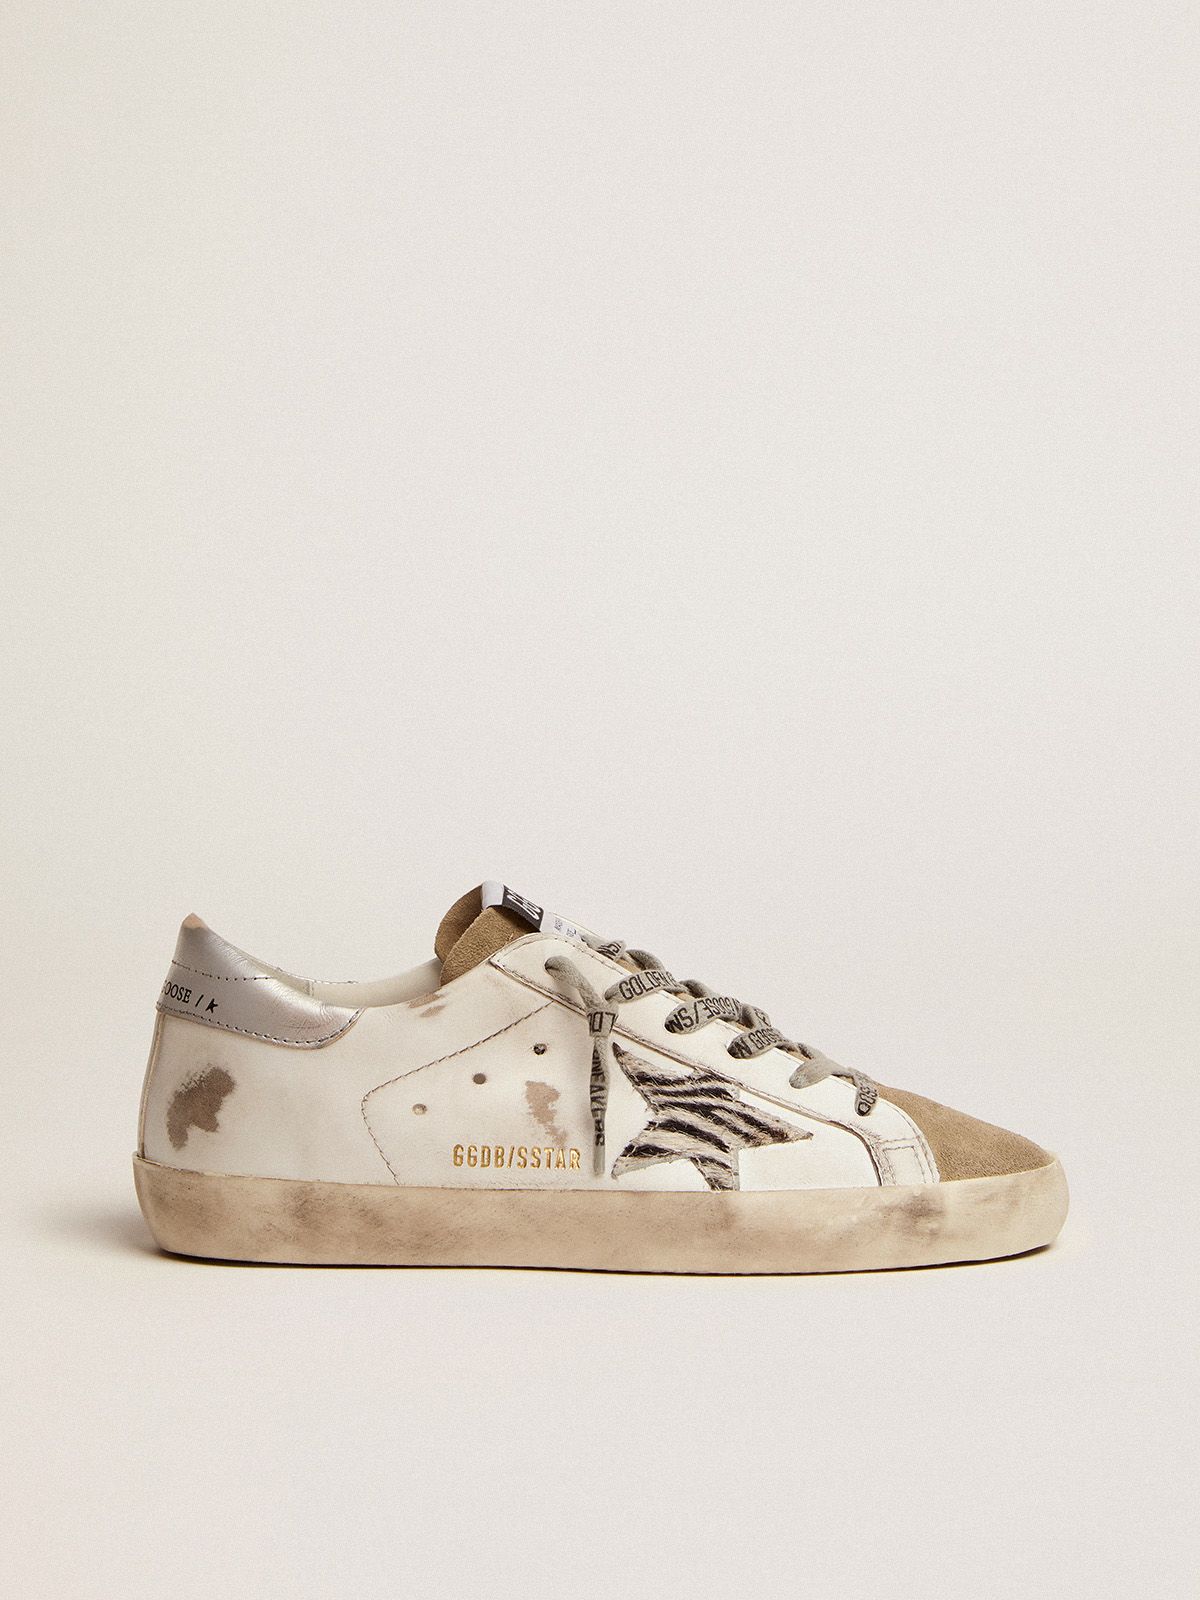 golden goose tab star with laminated skin zebra-print leather Super-Star and heel silver sneakers pony